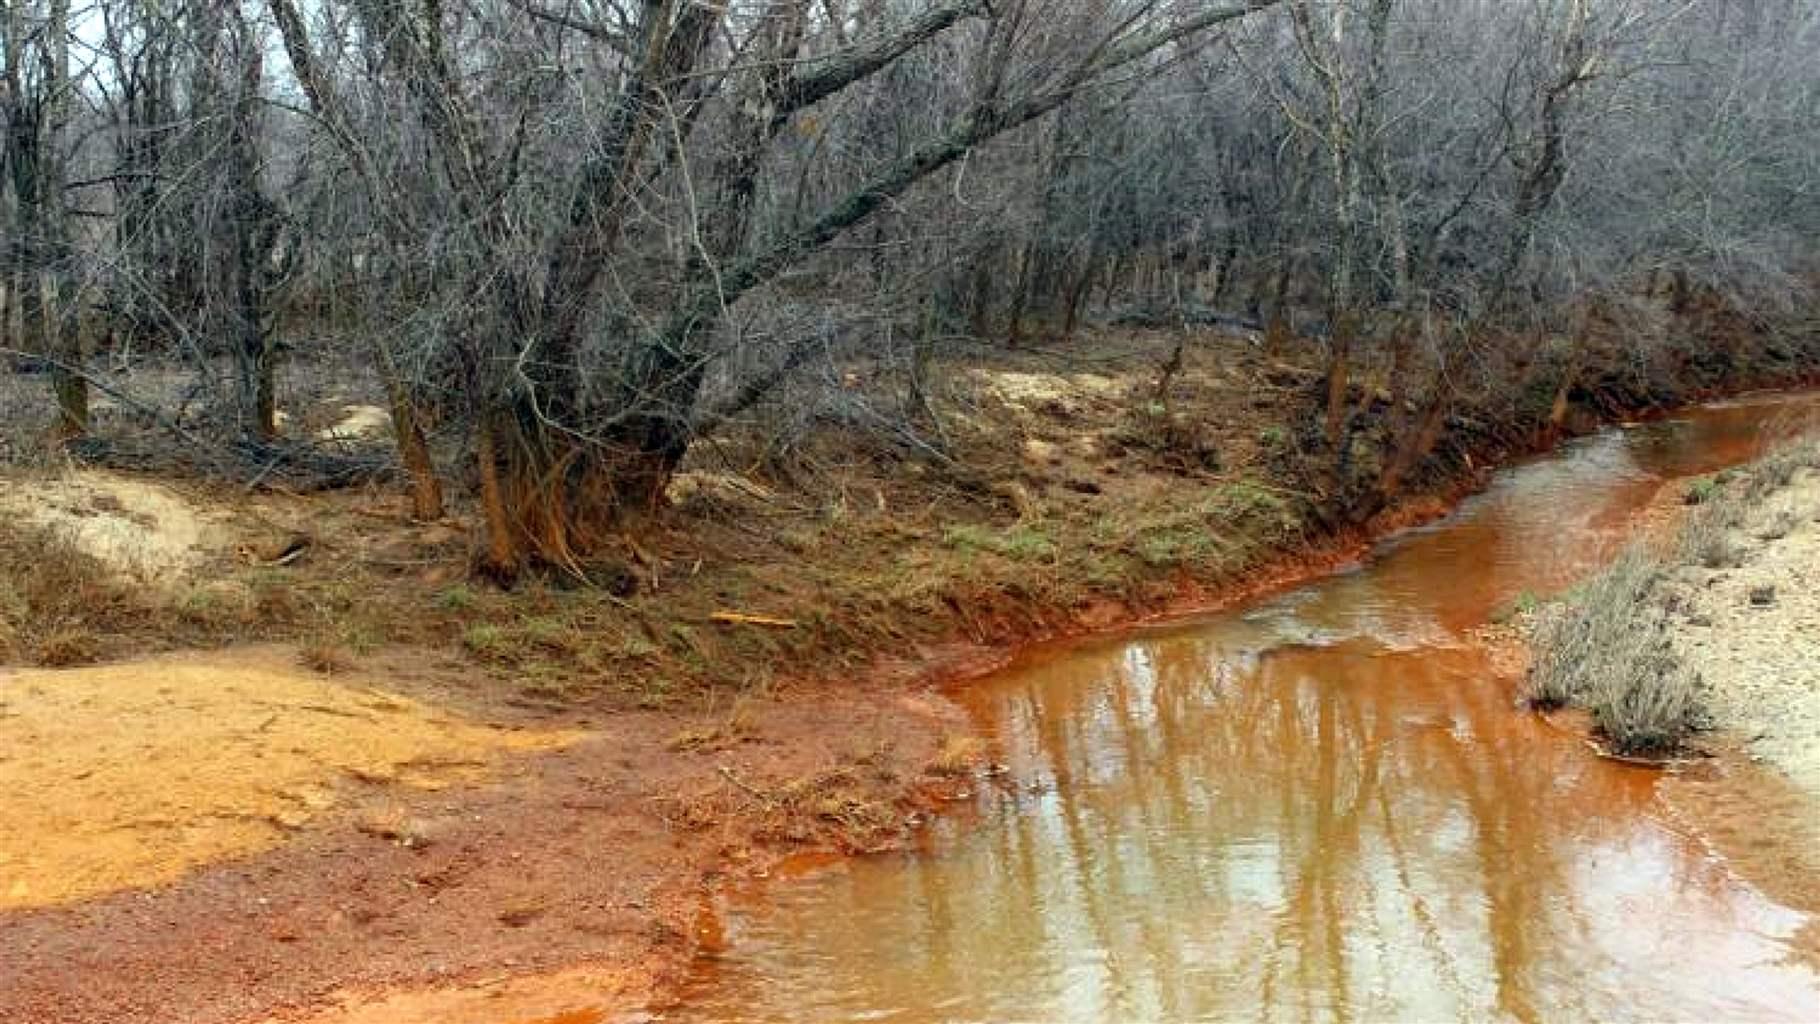 A creek bed with an orange tint from acid runoff